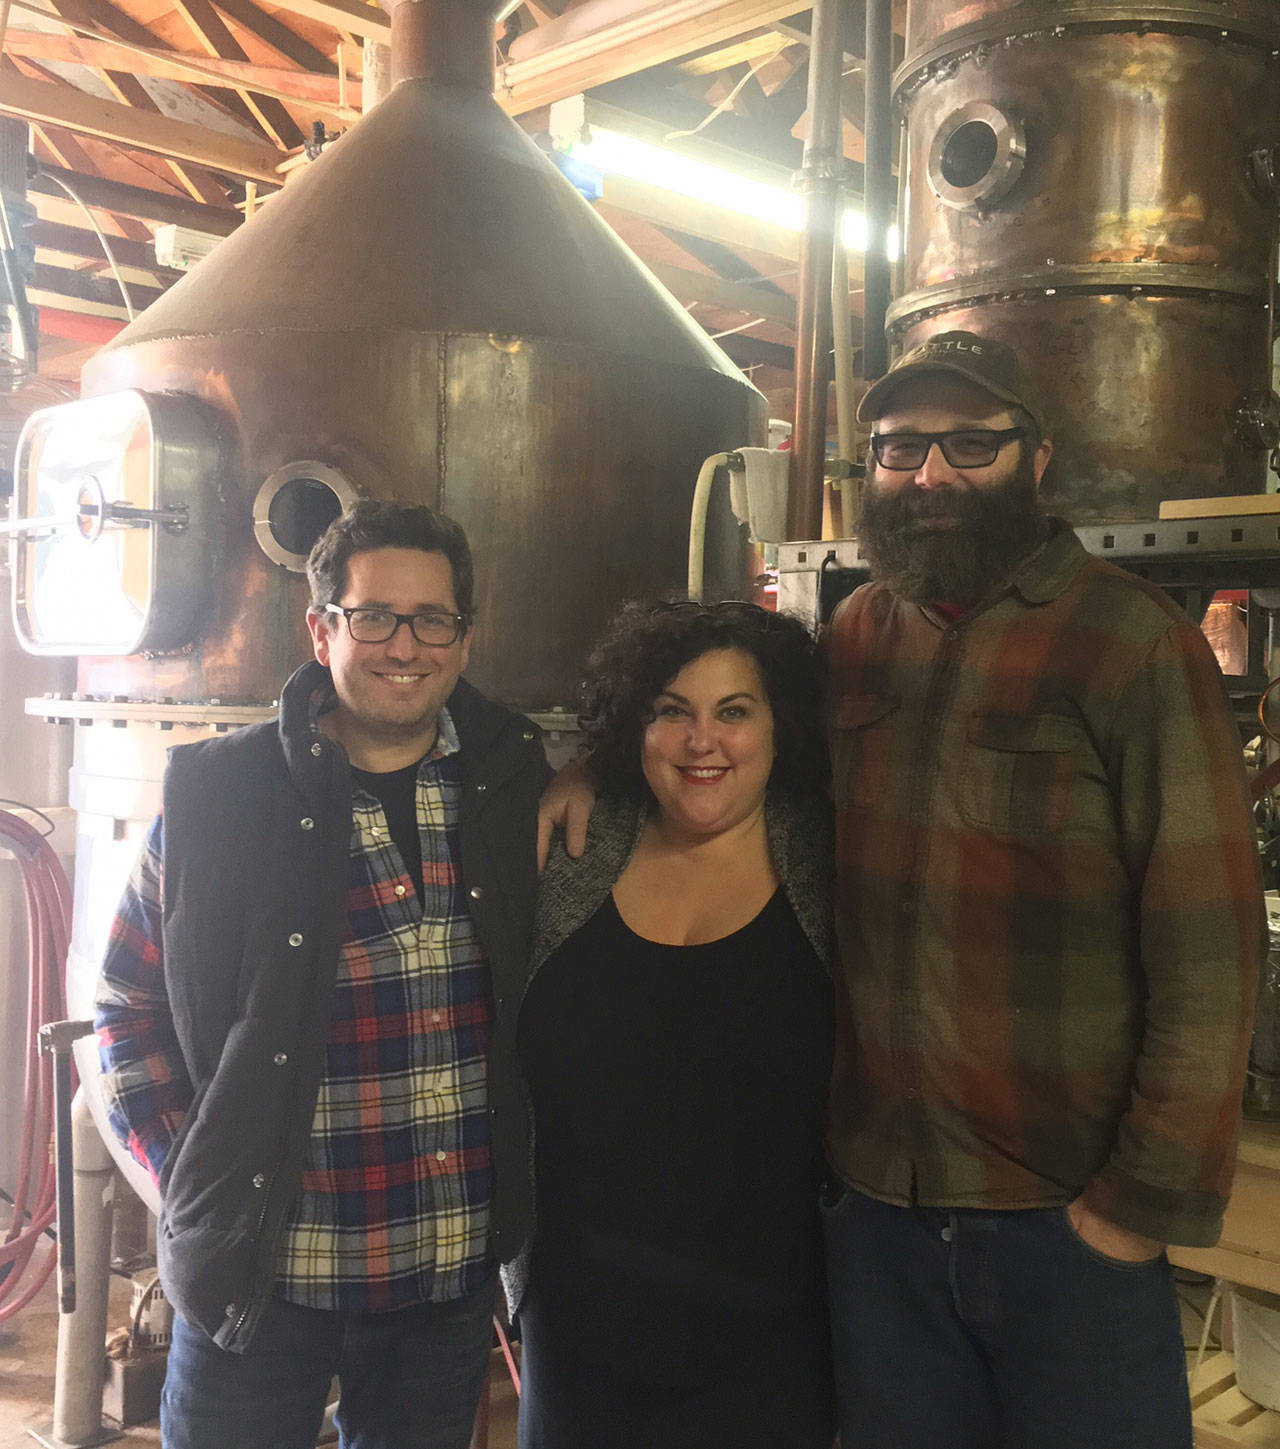 Left to right: Island brewer Matt Lawrence, Seattle Distilling’s Tami Brockway Joyce and Paco Joyce. Lawrence is planning to open a brewery in the former distillery. (Anneli Fogt/Staff Photo)